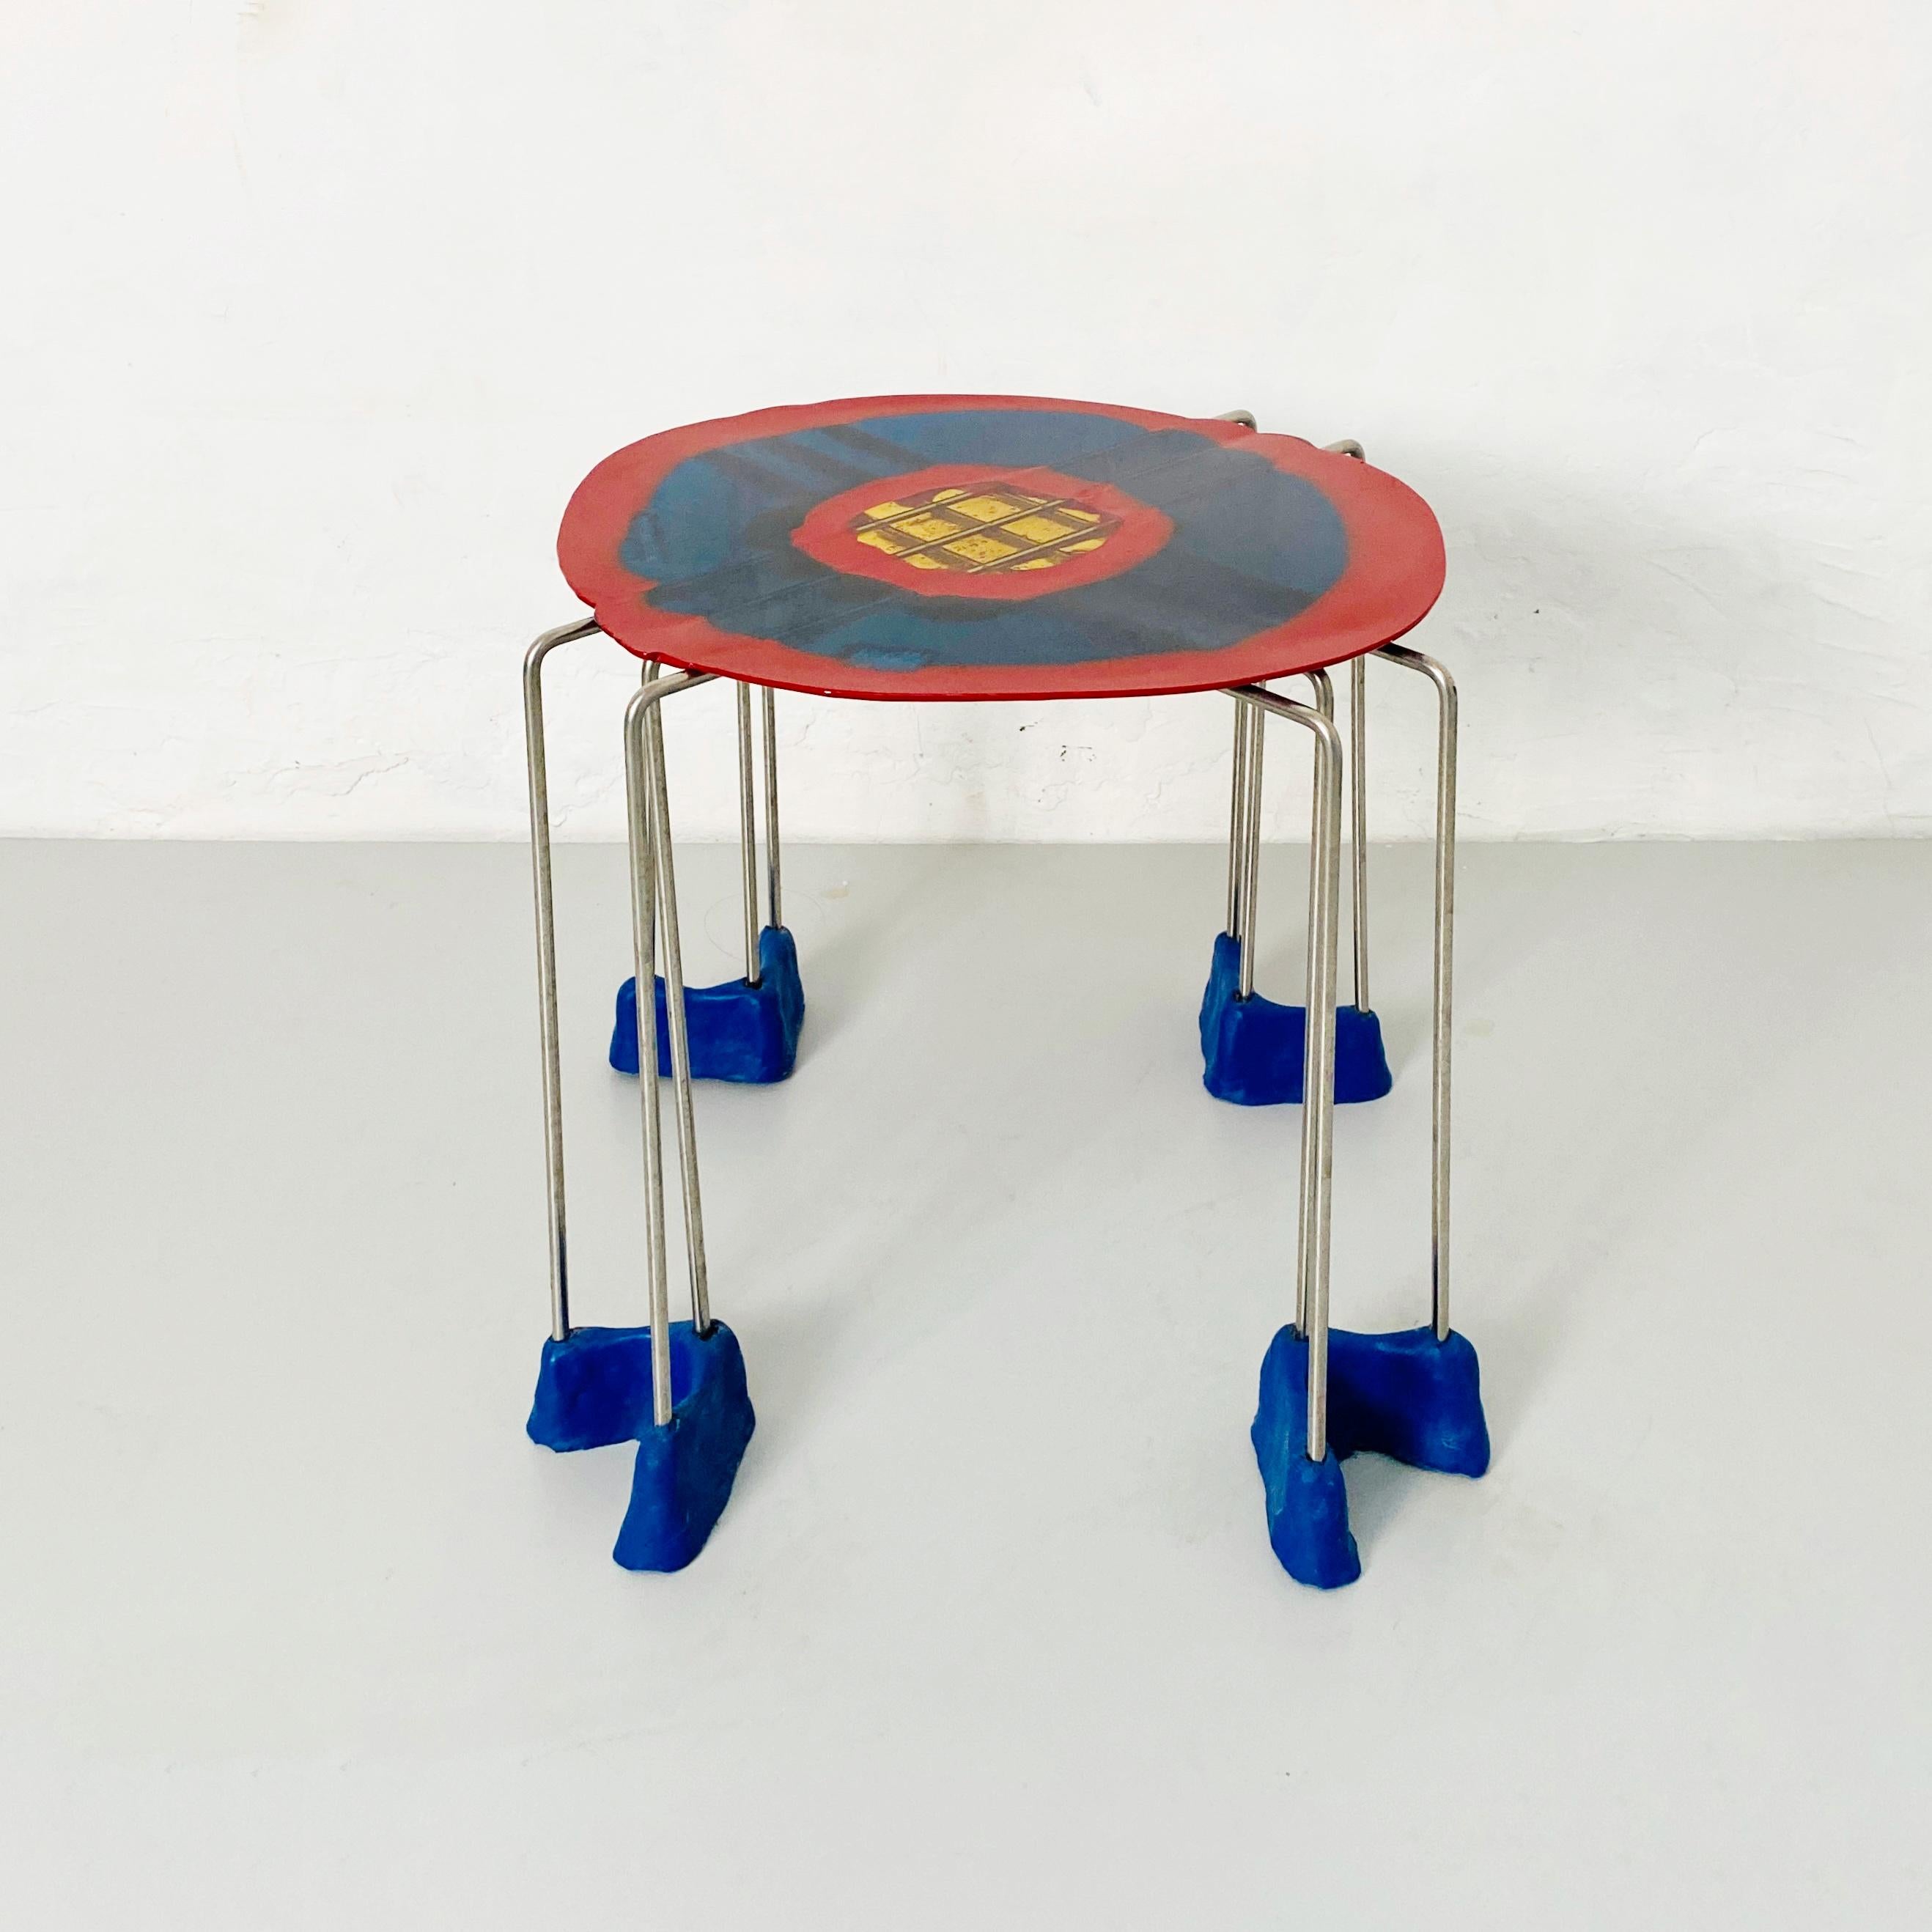 Triple play resin stool by Gaetano Pesce for Fish Design, 2000s
Stool with rigid resin top in red, stainless steel structure and flexible resin feet. 
Made by Fish Design and designed by Getano Pesce.

Good conditions.

Measurements in cm 40 x